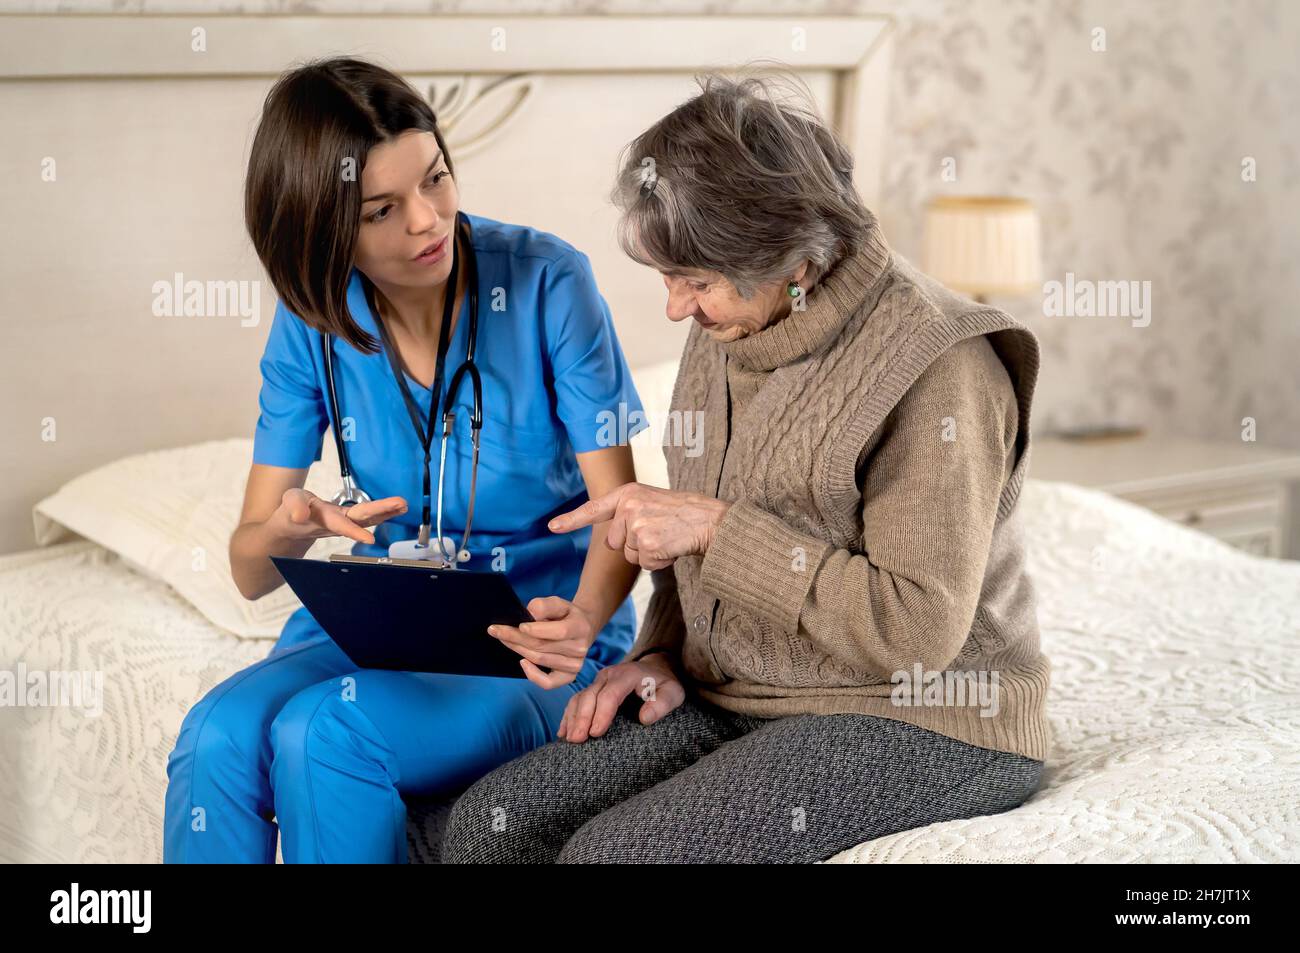 Young nurse is caring for an elderly 80 year-old woman at home. Stock Photo